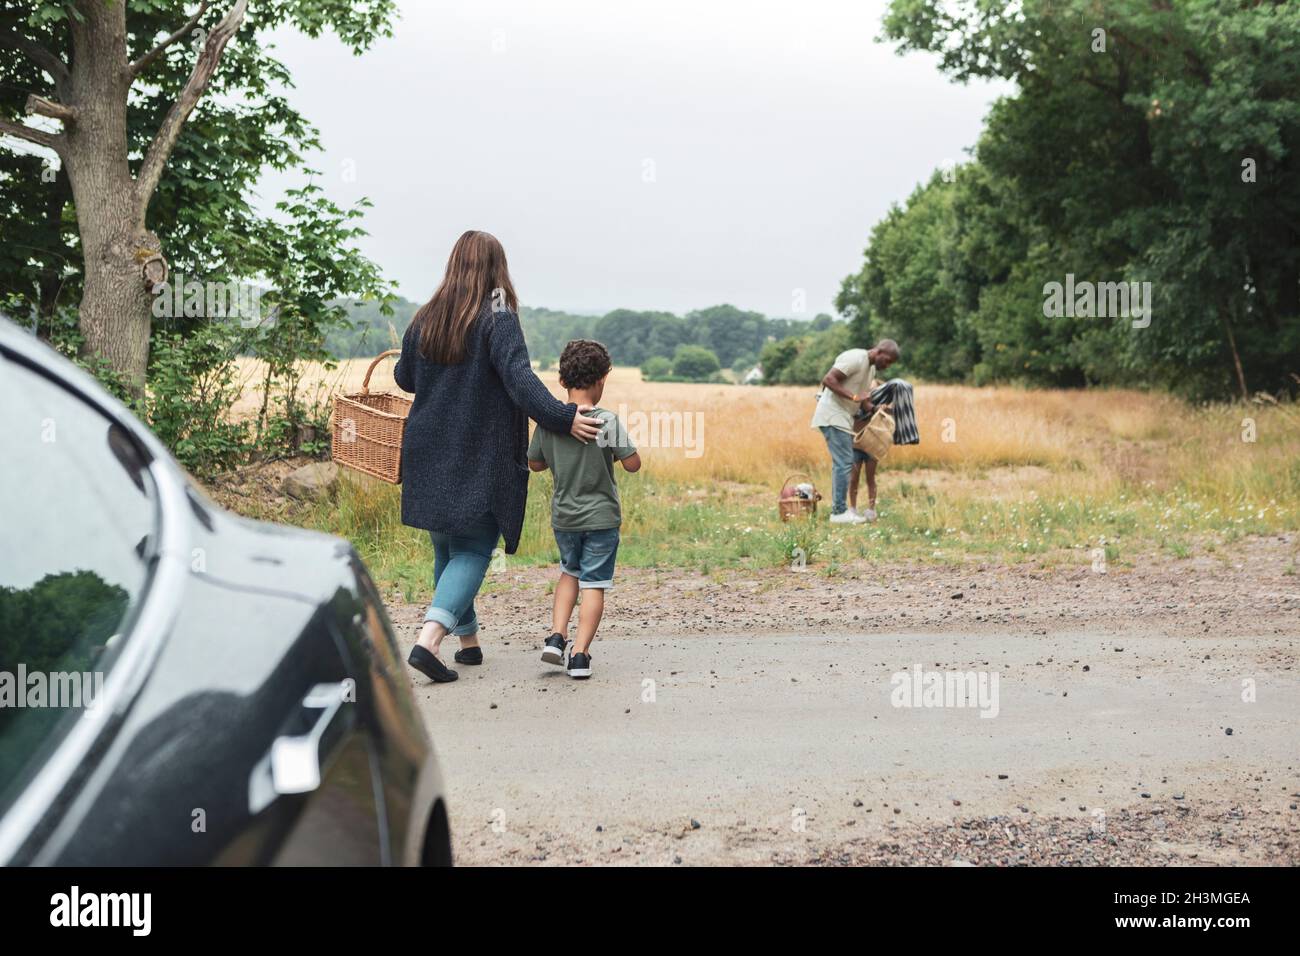 Rear view of woman walking with son towards family during picnic Stock Photo